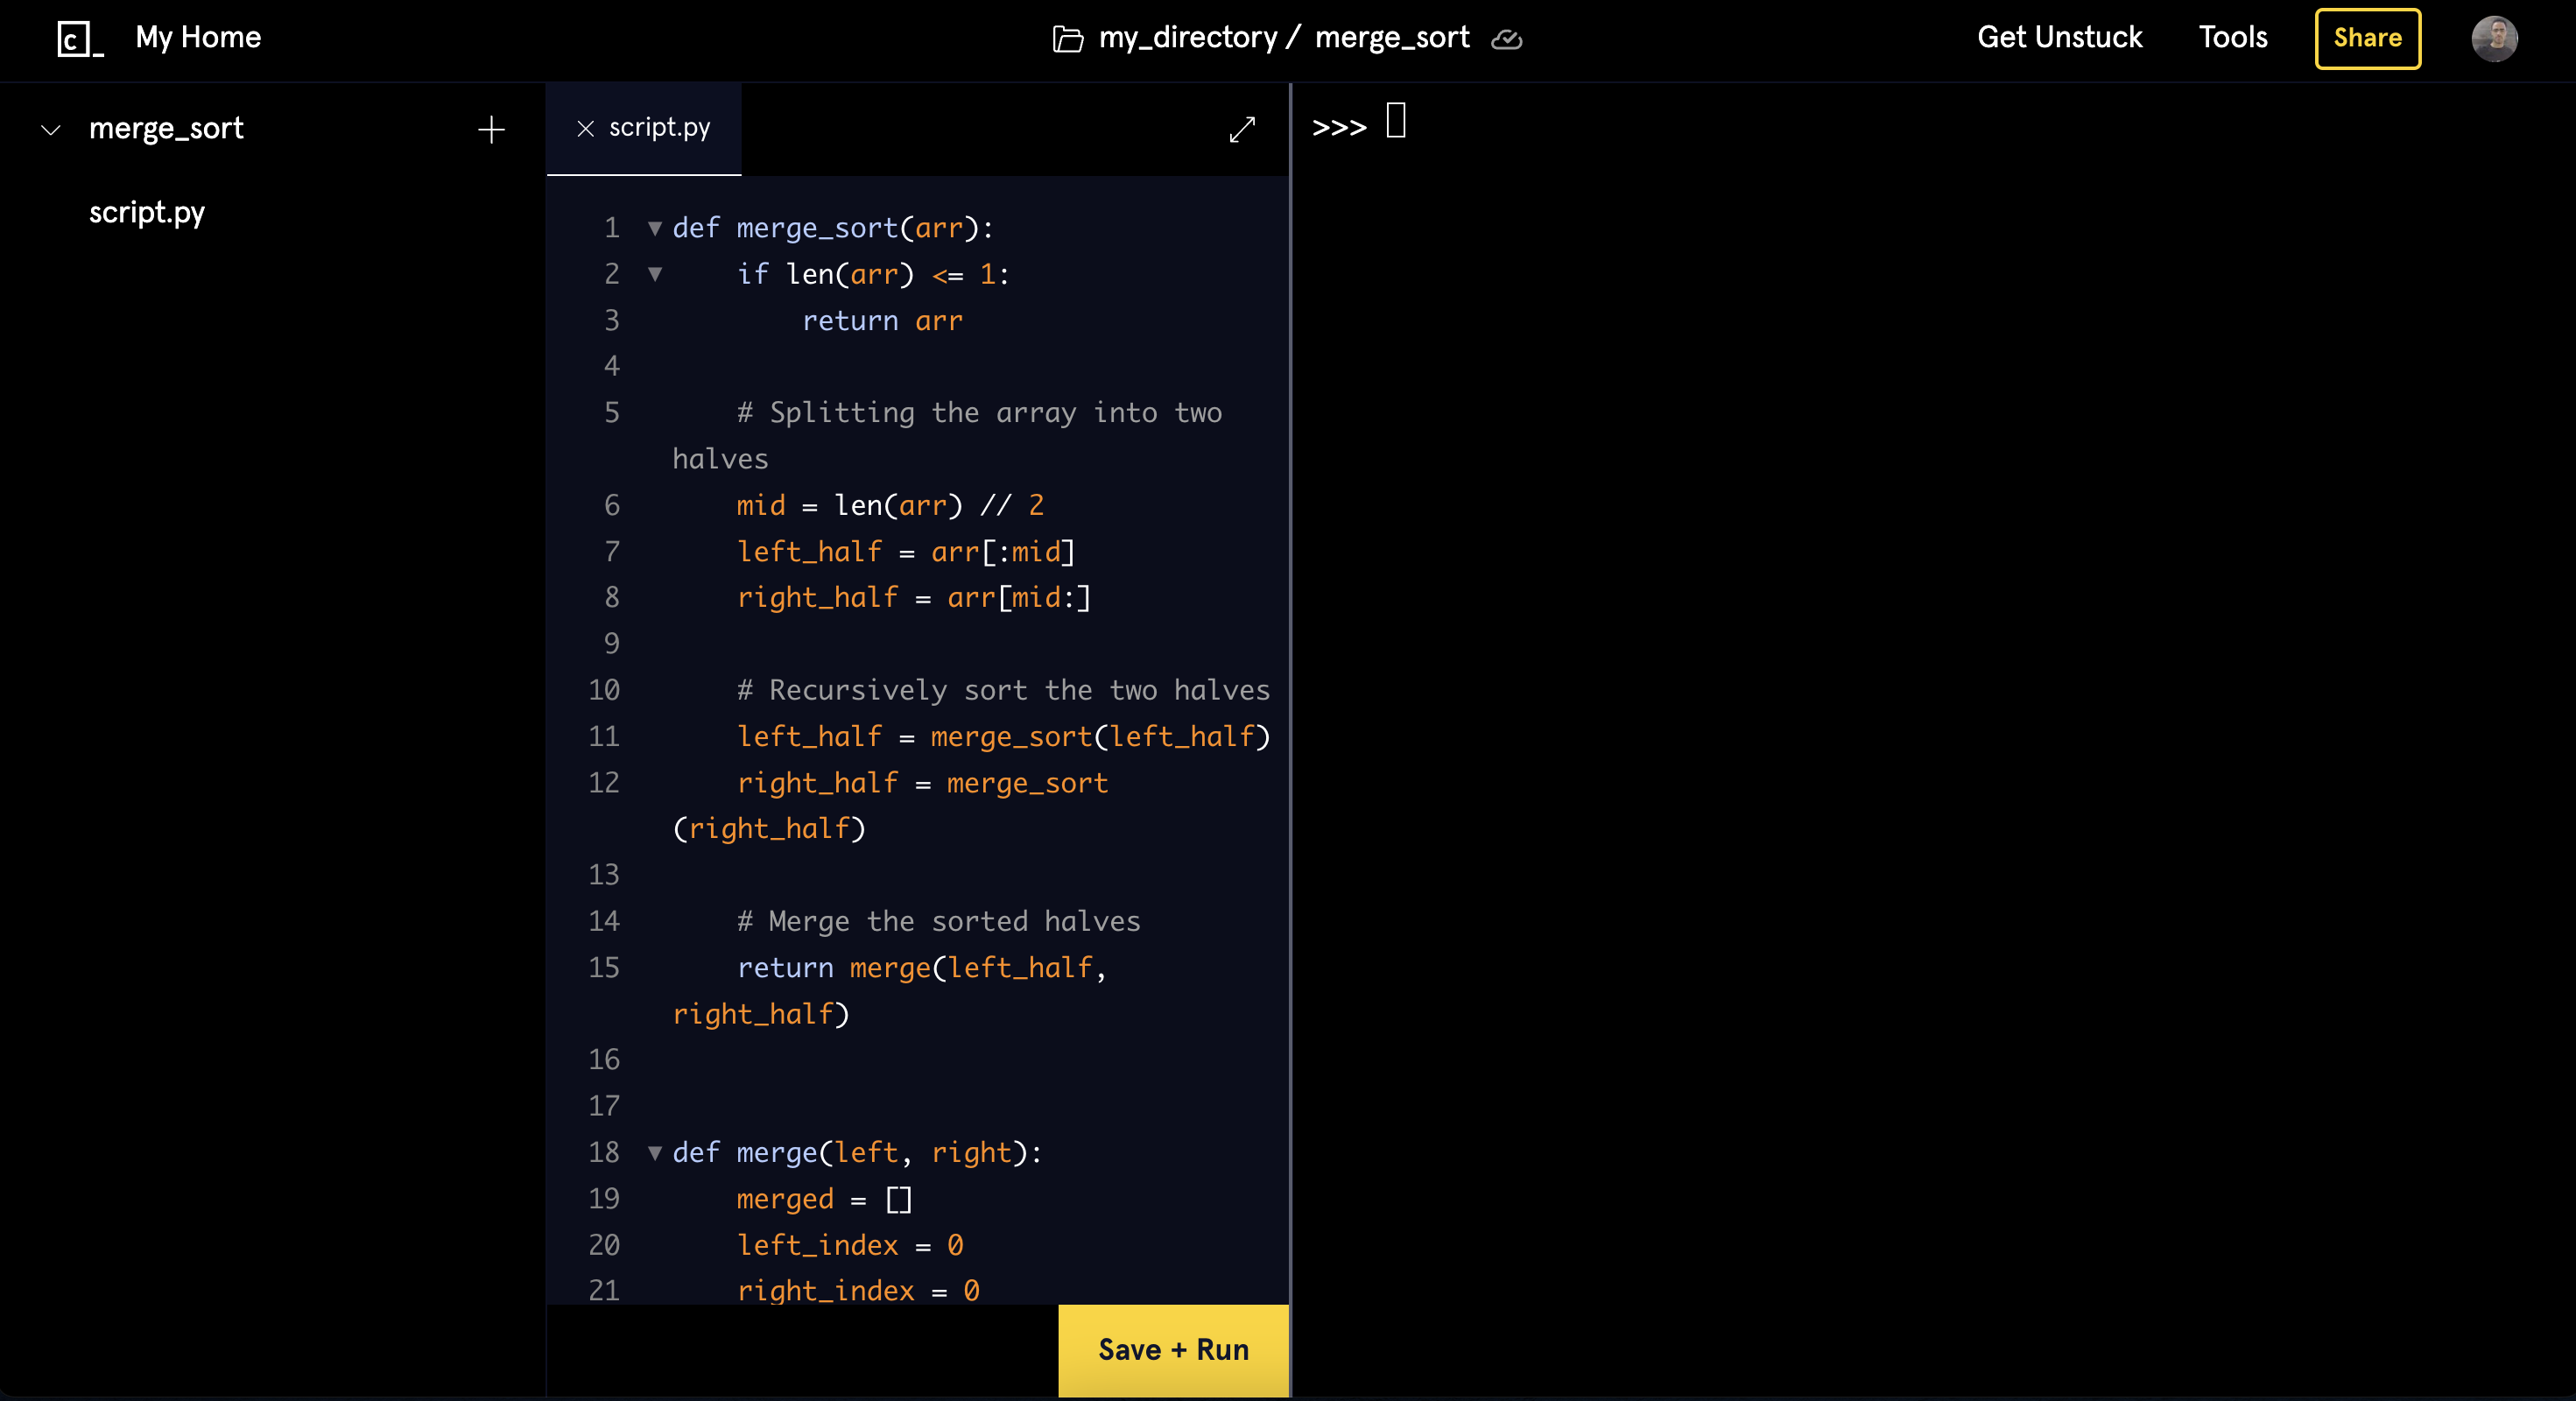 screenshot of codecademy's learning environment